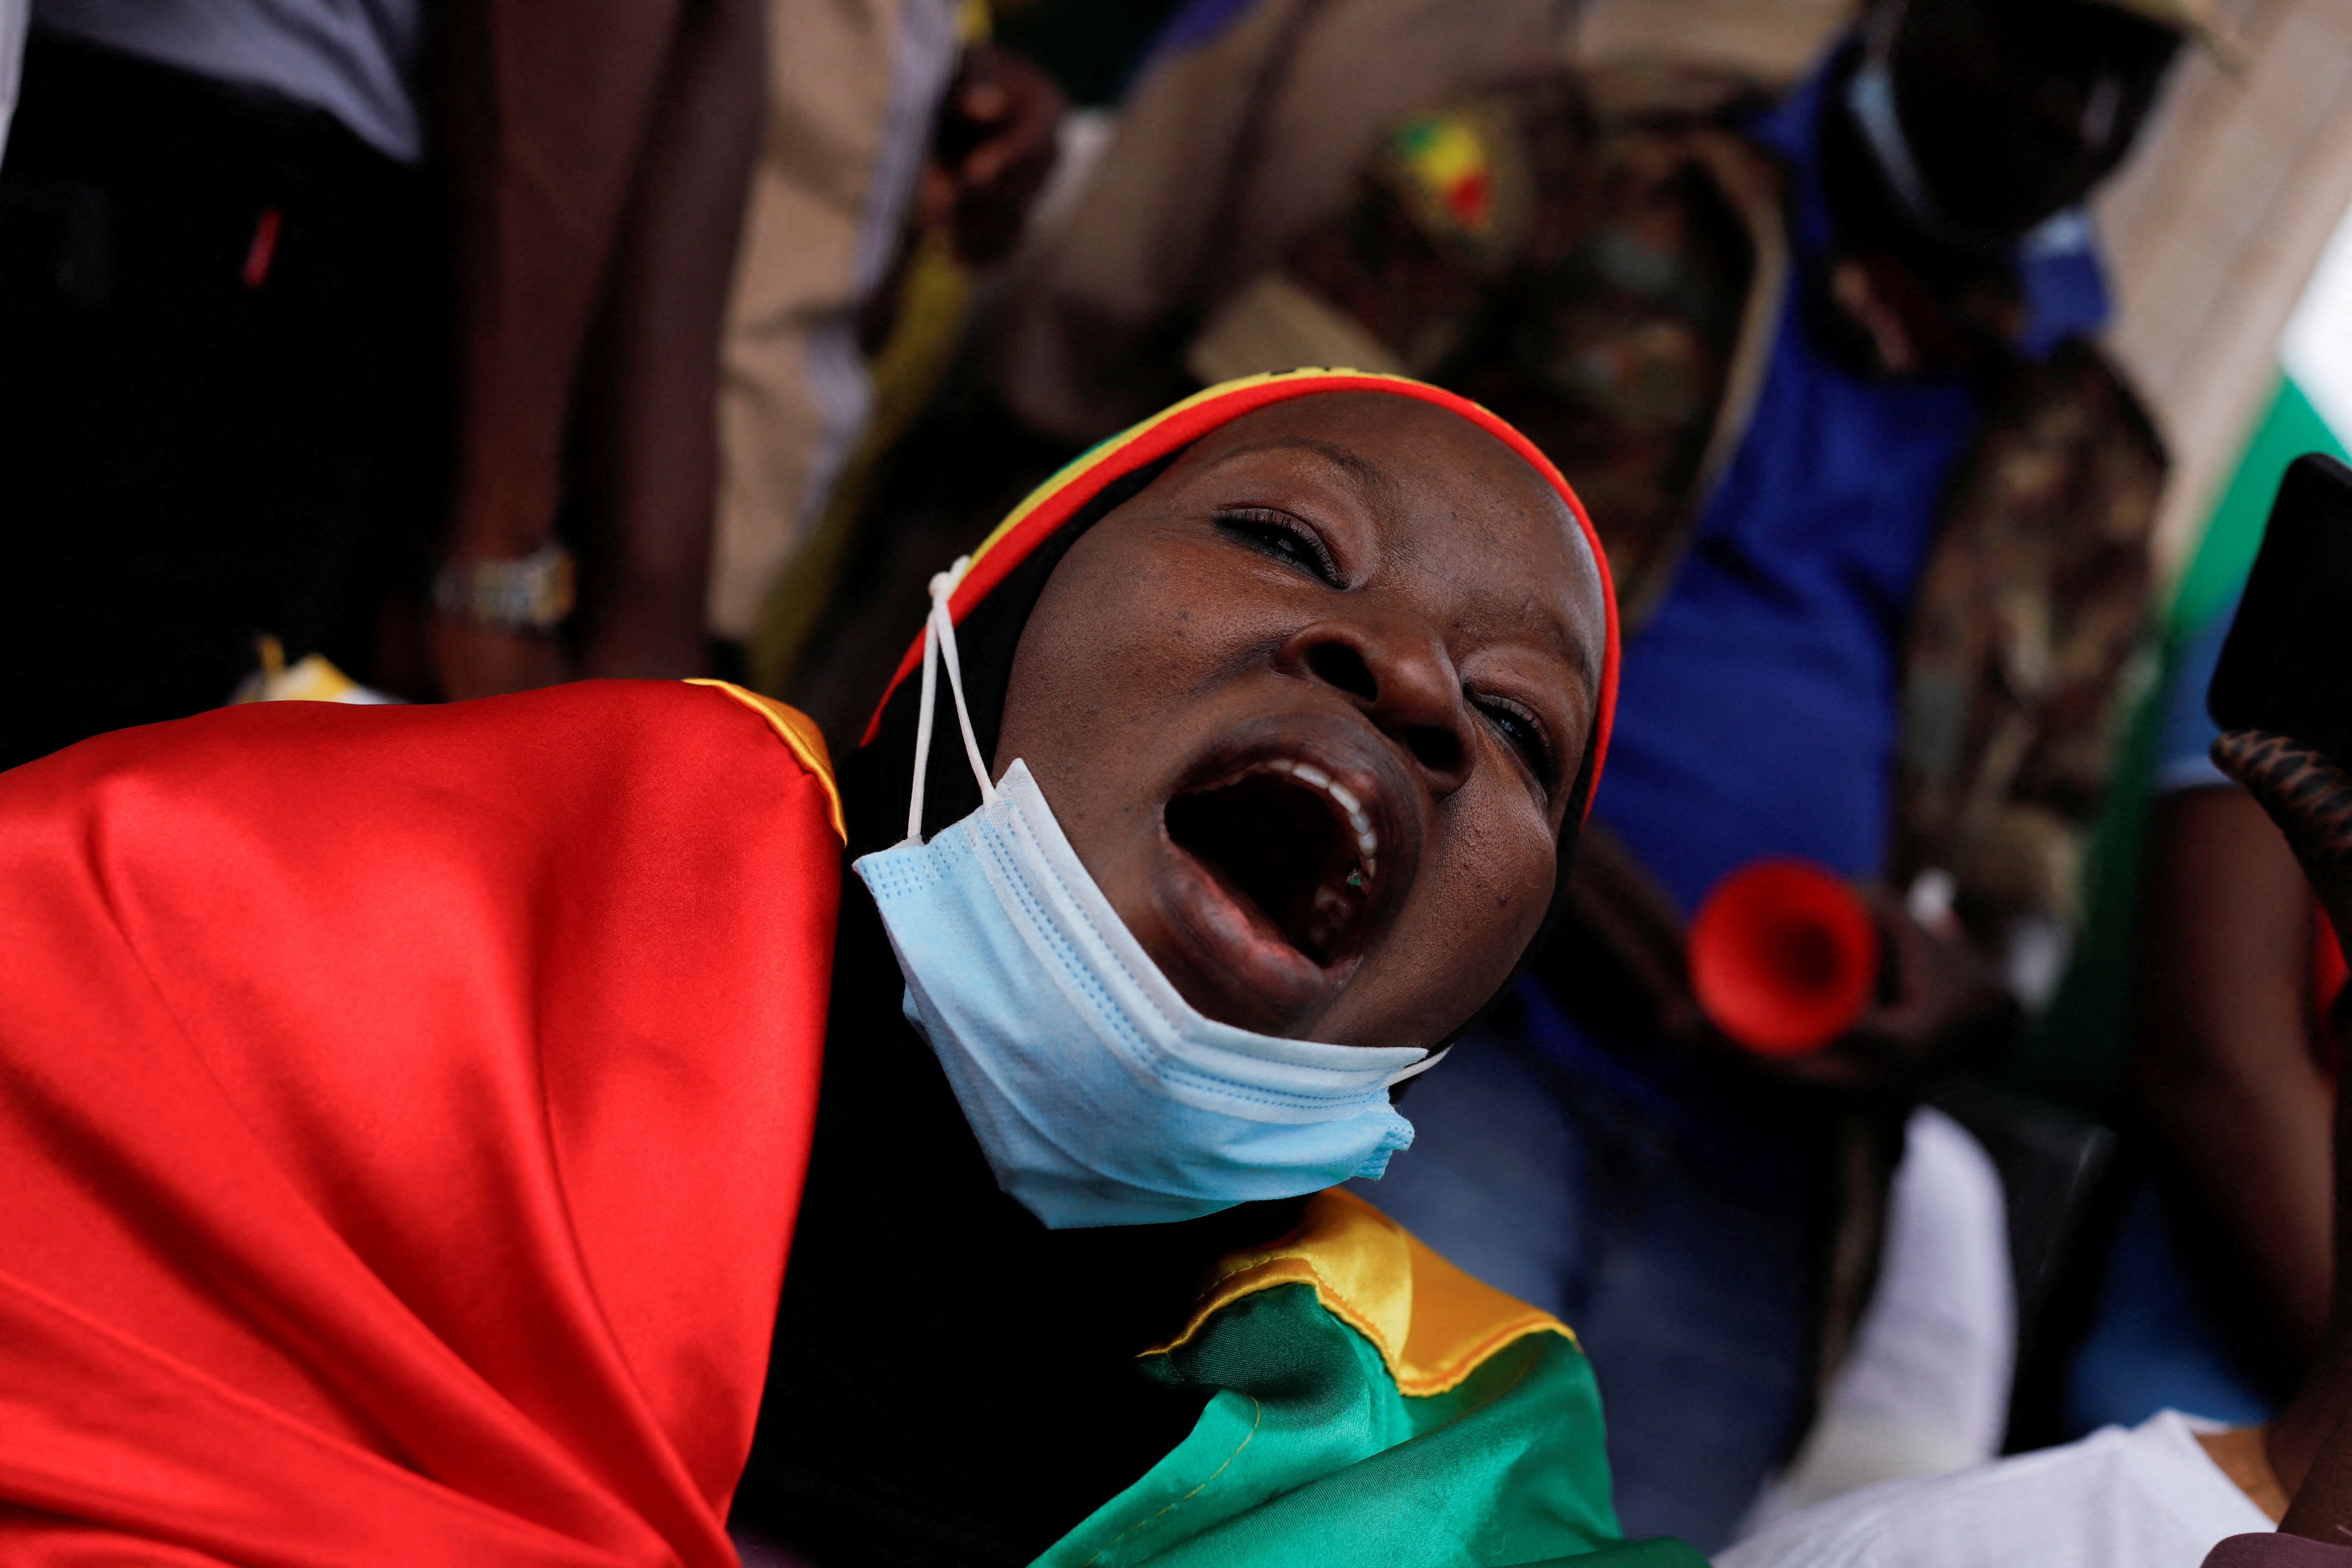 A woman wearing Mali's flag colour, shouts as she participates in a demonstration called by Mali's transitional government after ECOWAS (Economic Community of West African States) imposed sanctions in Bamako, Mali, January 14,